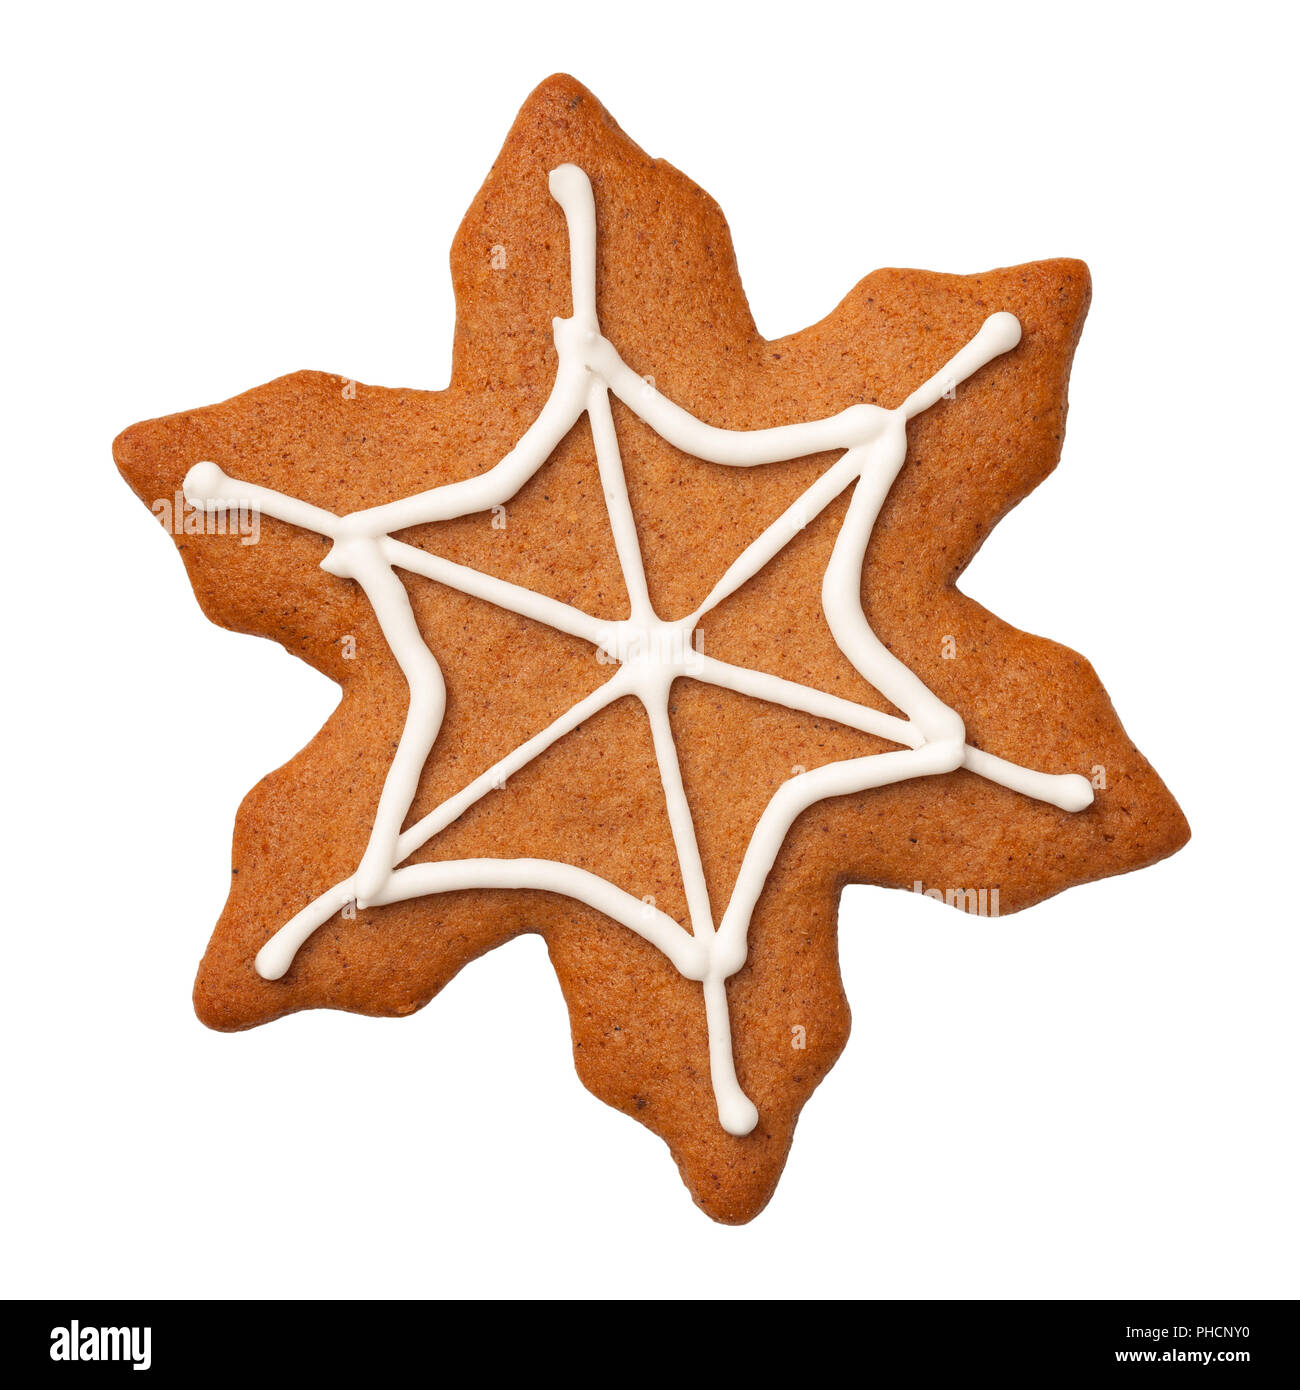 Halloween Gingerbread Cookie Spiderweb Isolated on White Background Stock Photo